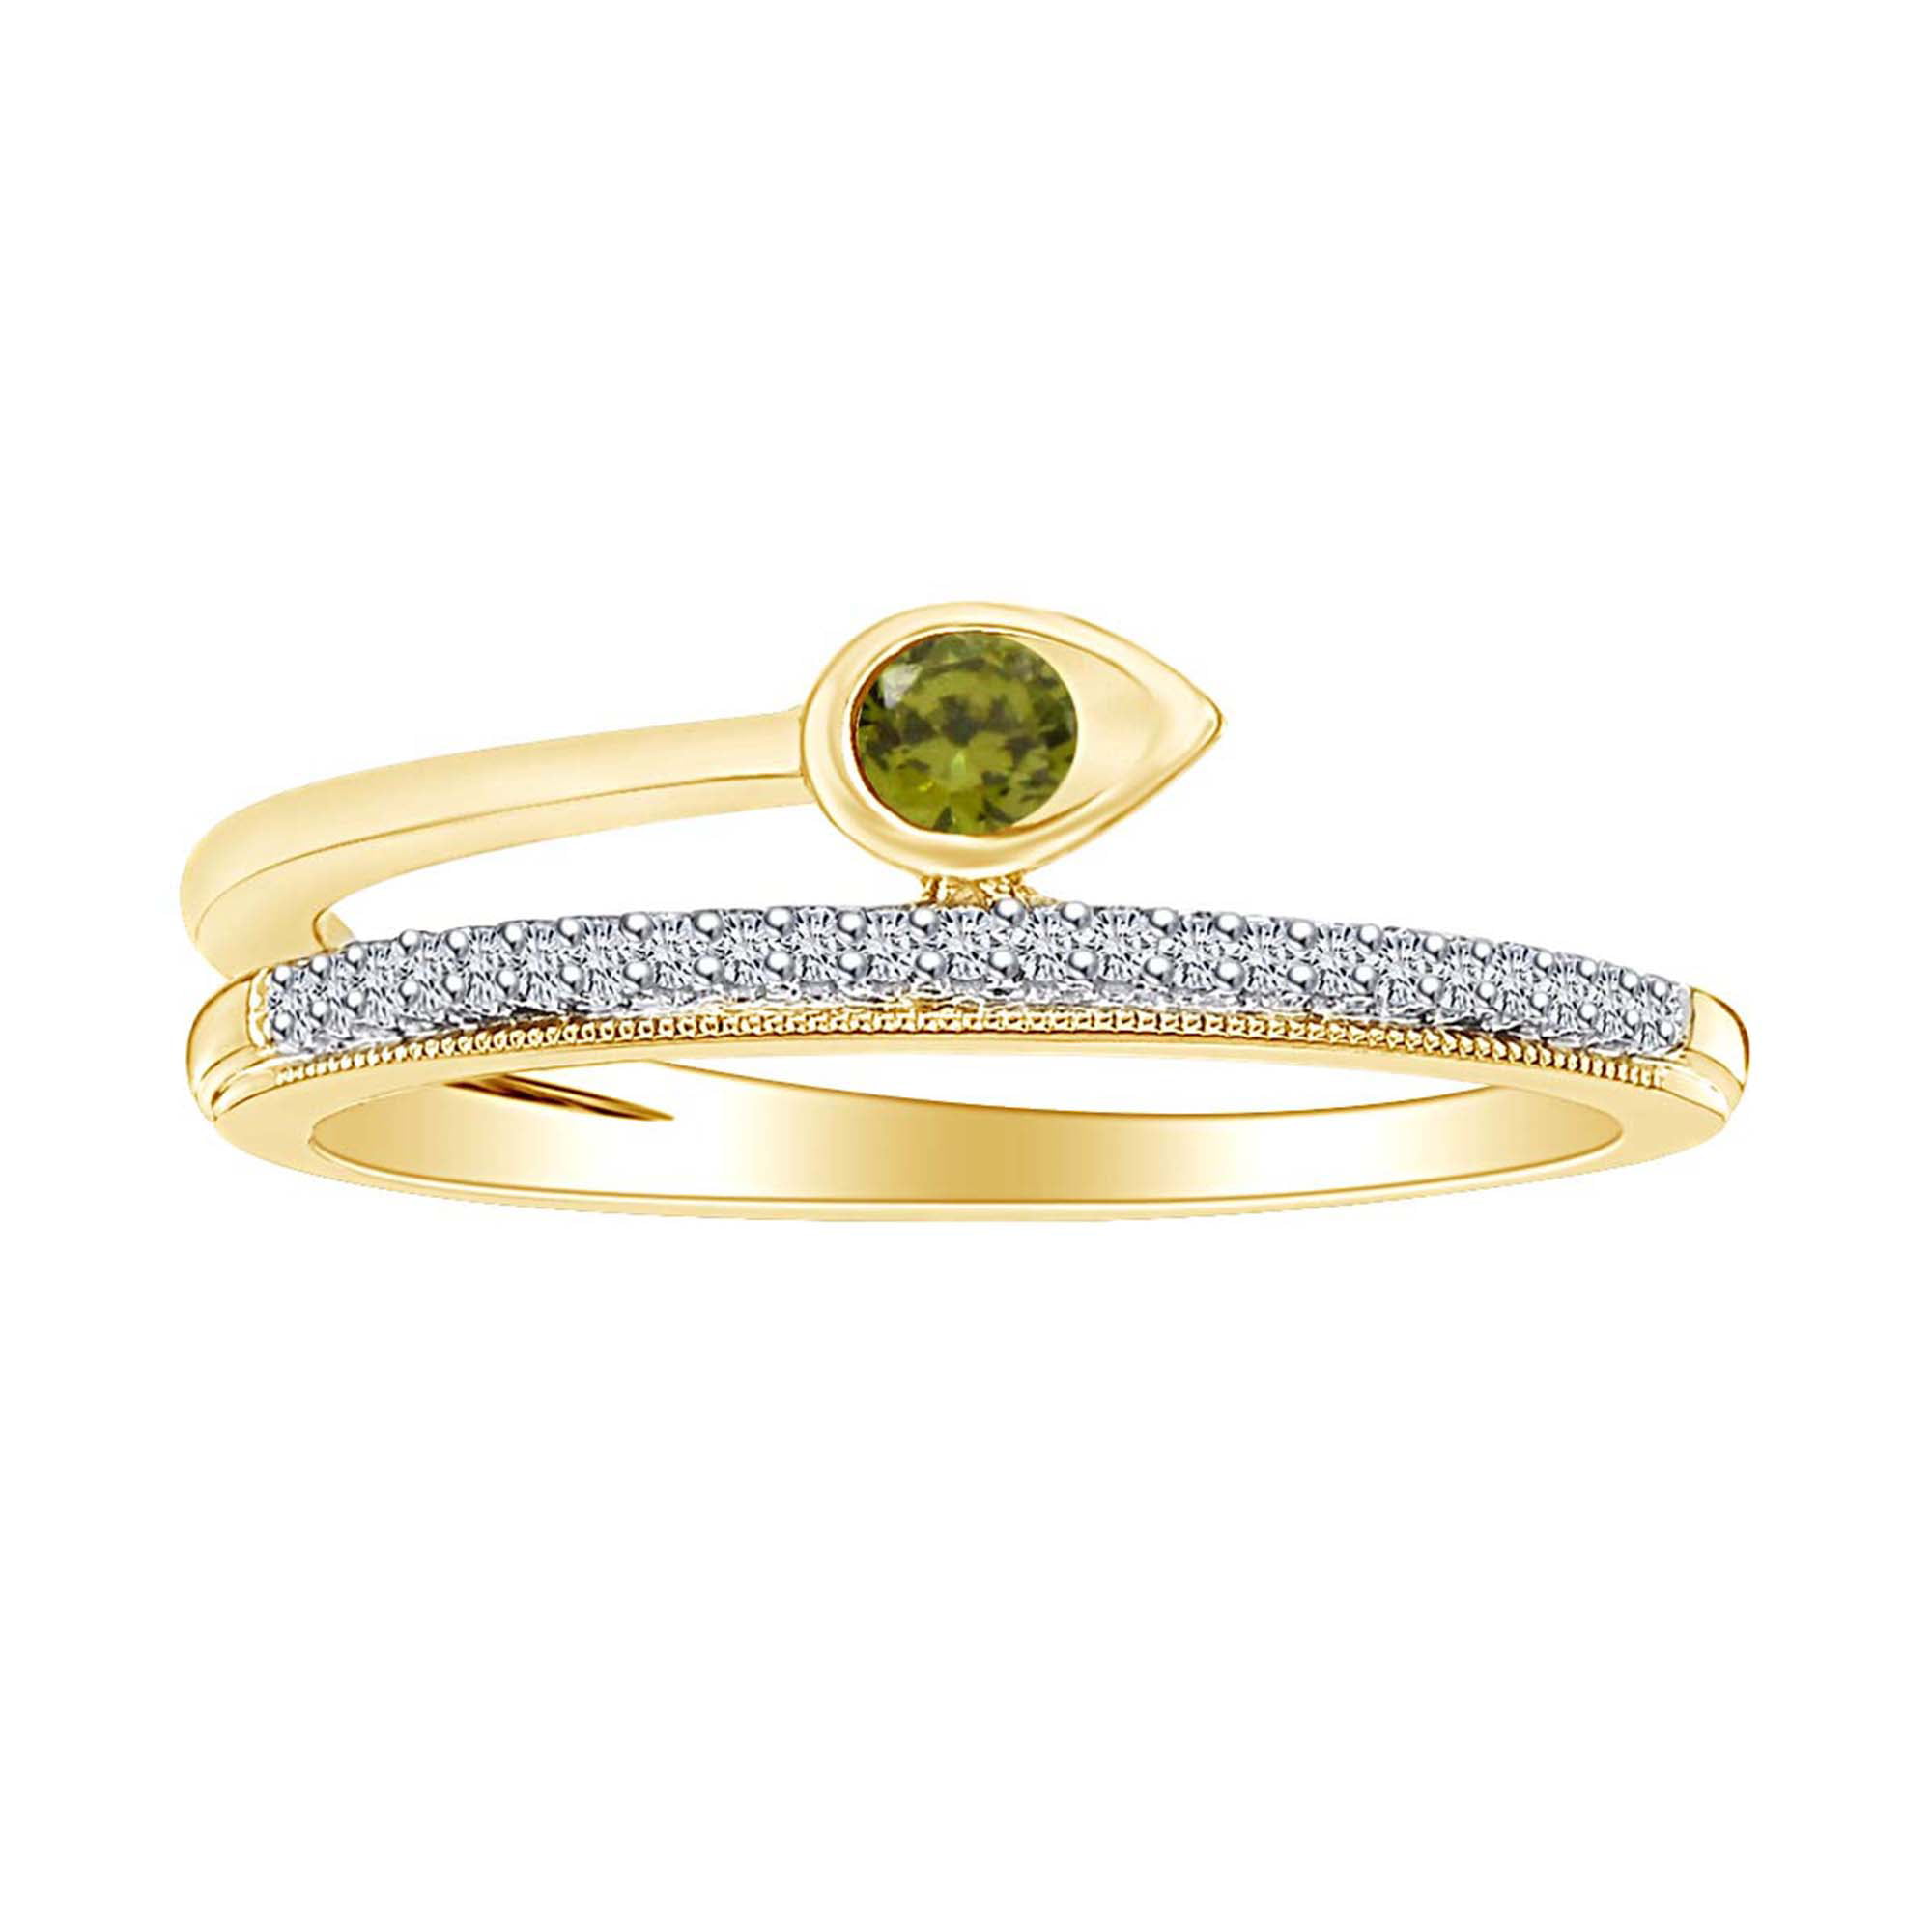 Wishrocks Simulated Birthstone with CZ Mens Wedding Band Ring in 14K Yellow Gold Over Sterling Silver